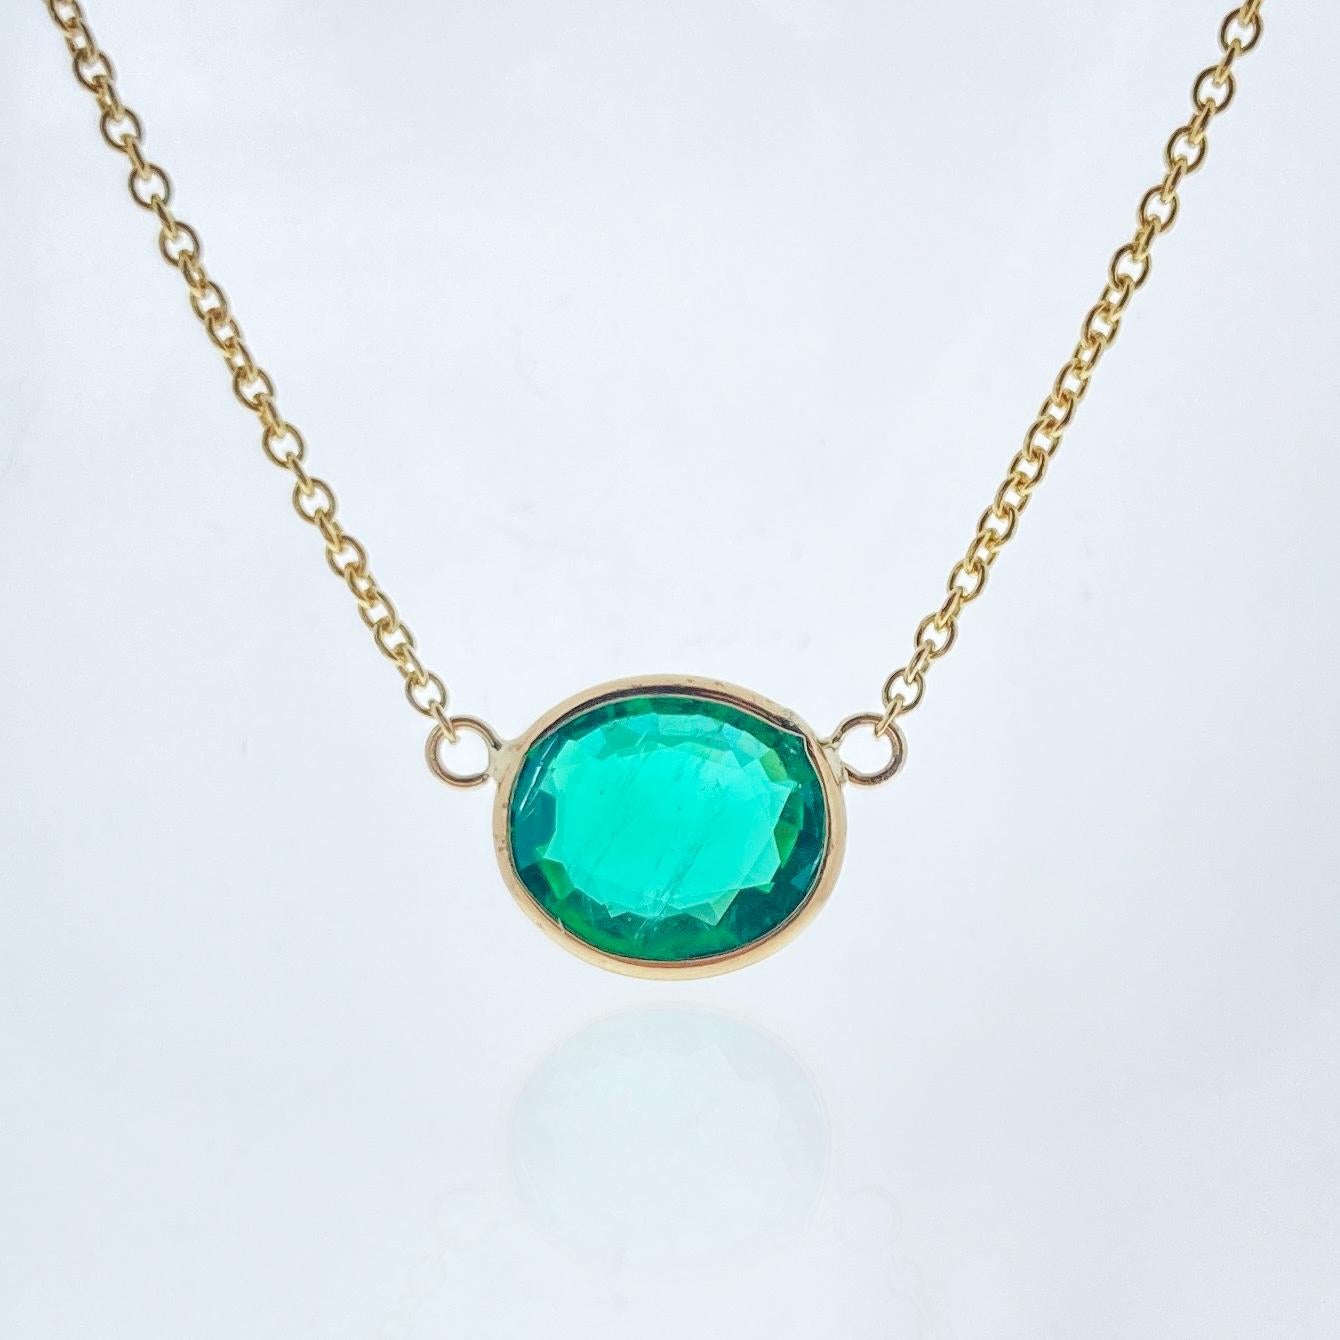 This necklace features an oval-cut green emerald with a weight of 1.62 carats, set in 14k yellow gold (YG). Emeralds are known for their rich green color, and the oval cut is a classic and timeless choice for gemstones, offering an elegant and